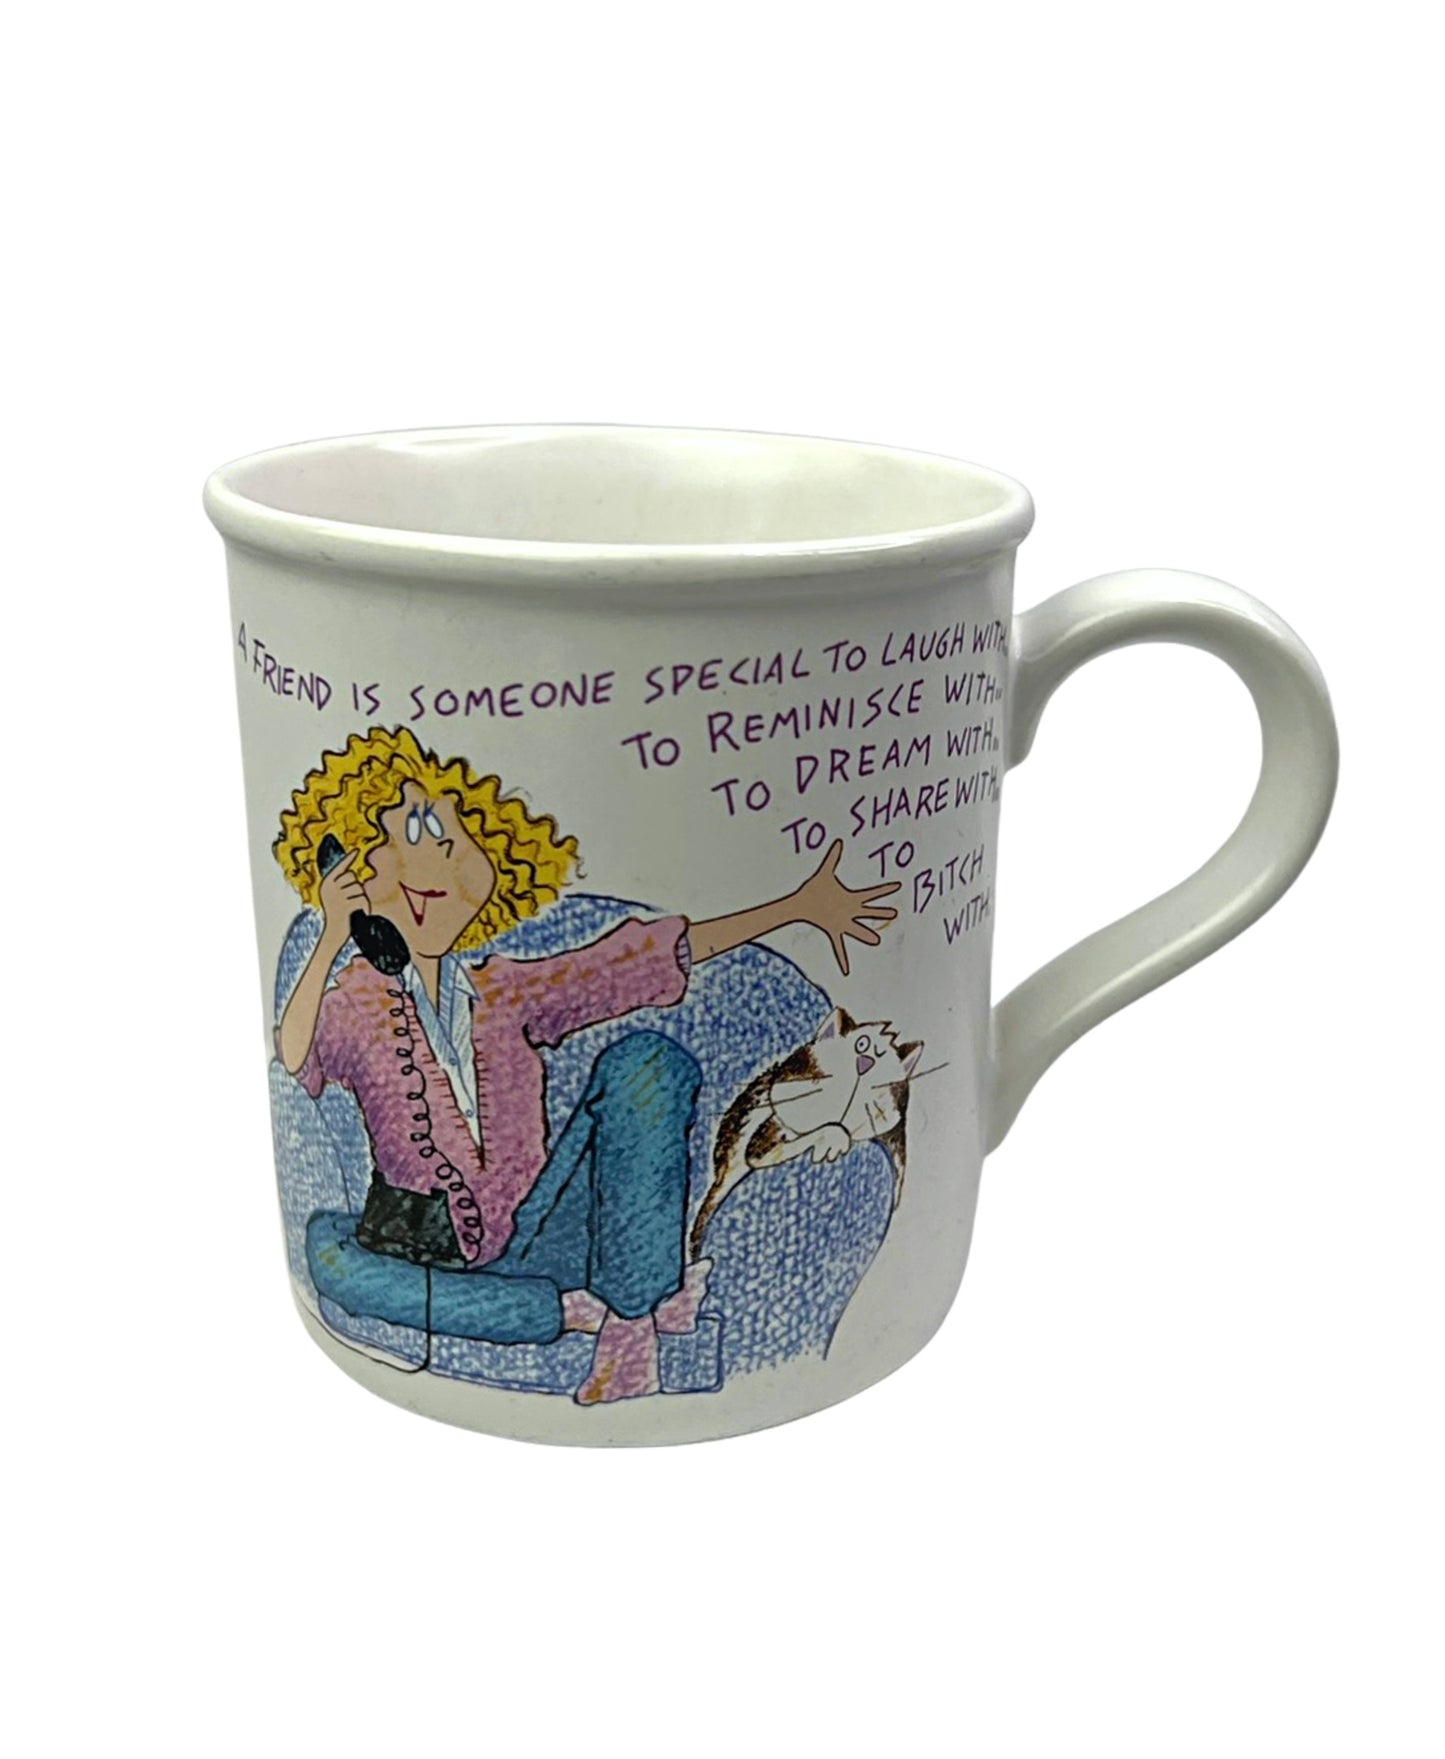 90’s A Friend is Someone Special to Laugh, Reminisce, Dream, Share, Bitch With Funny Coffee Mug